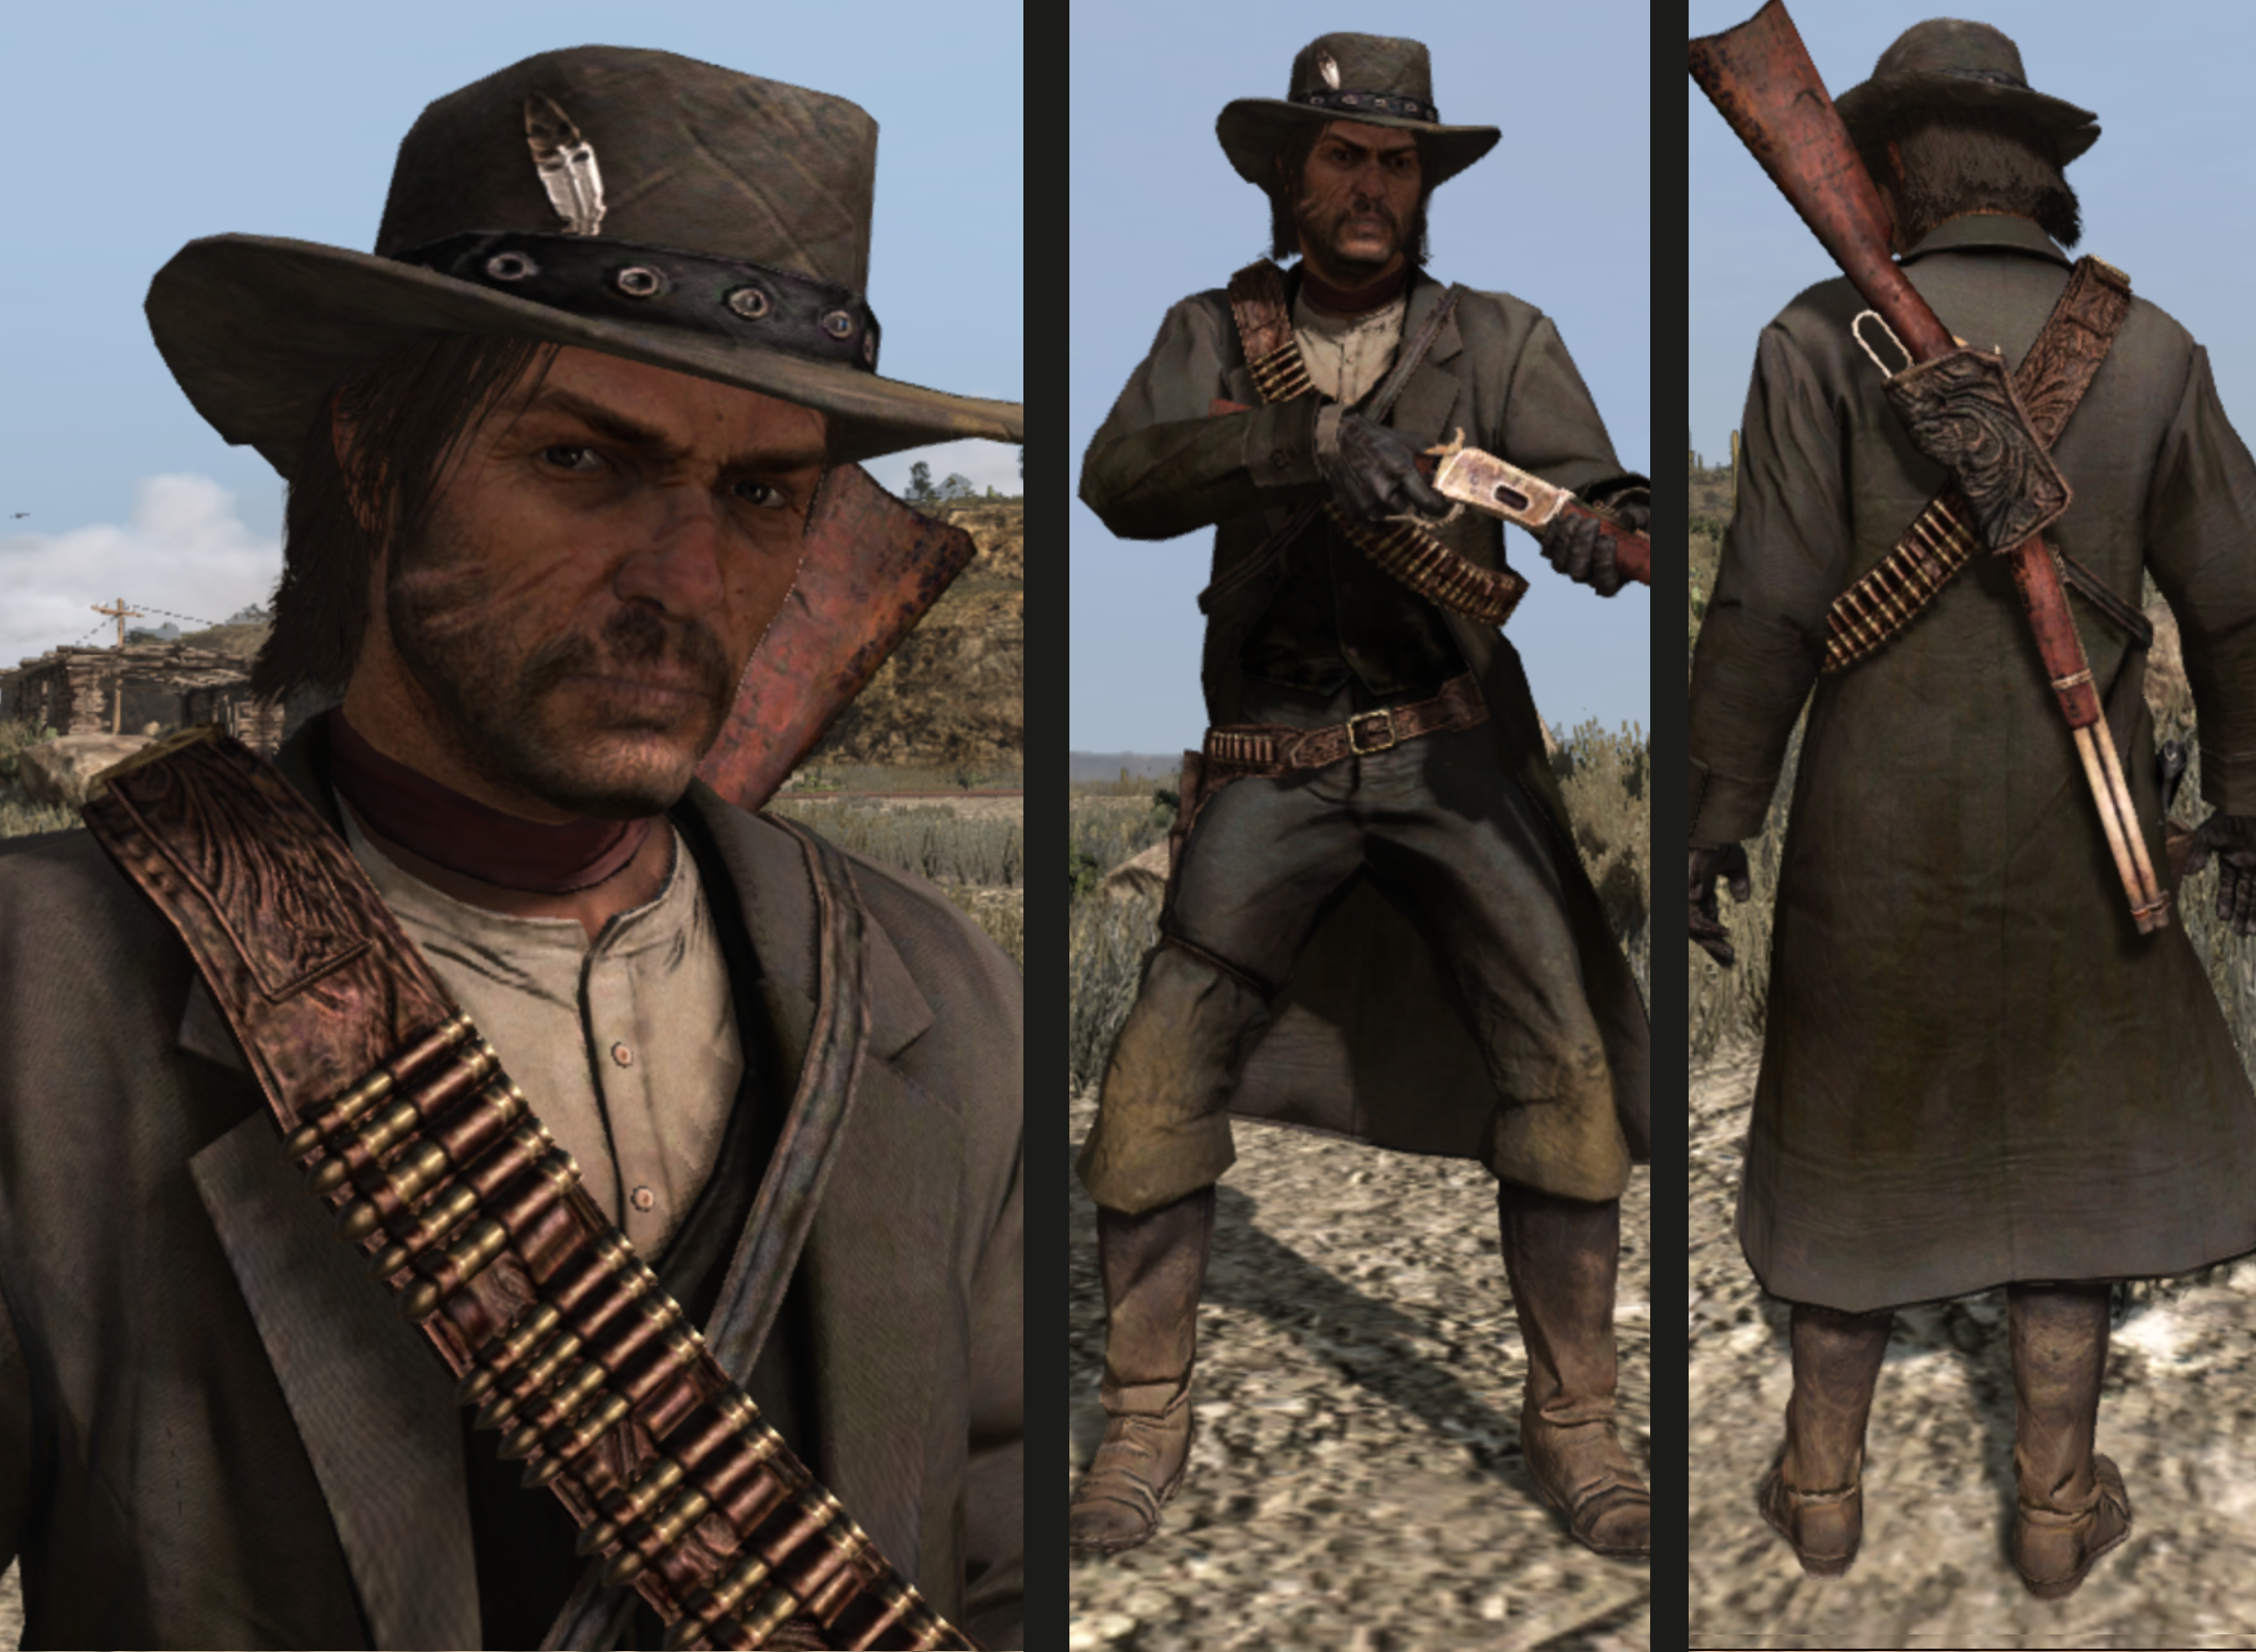 Arriba 43+ imagen legend of the west outfit rdr2